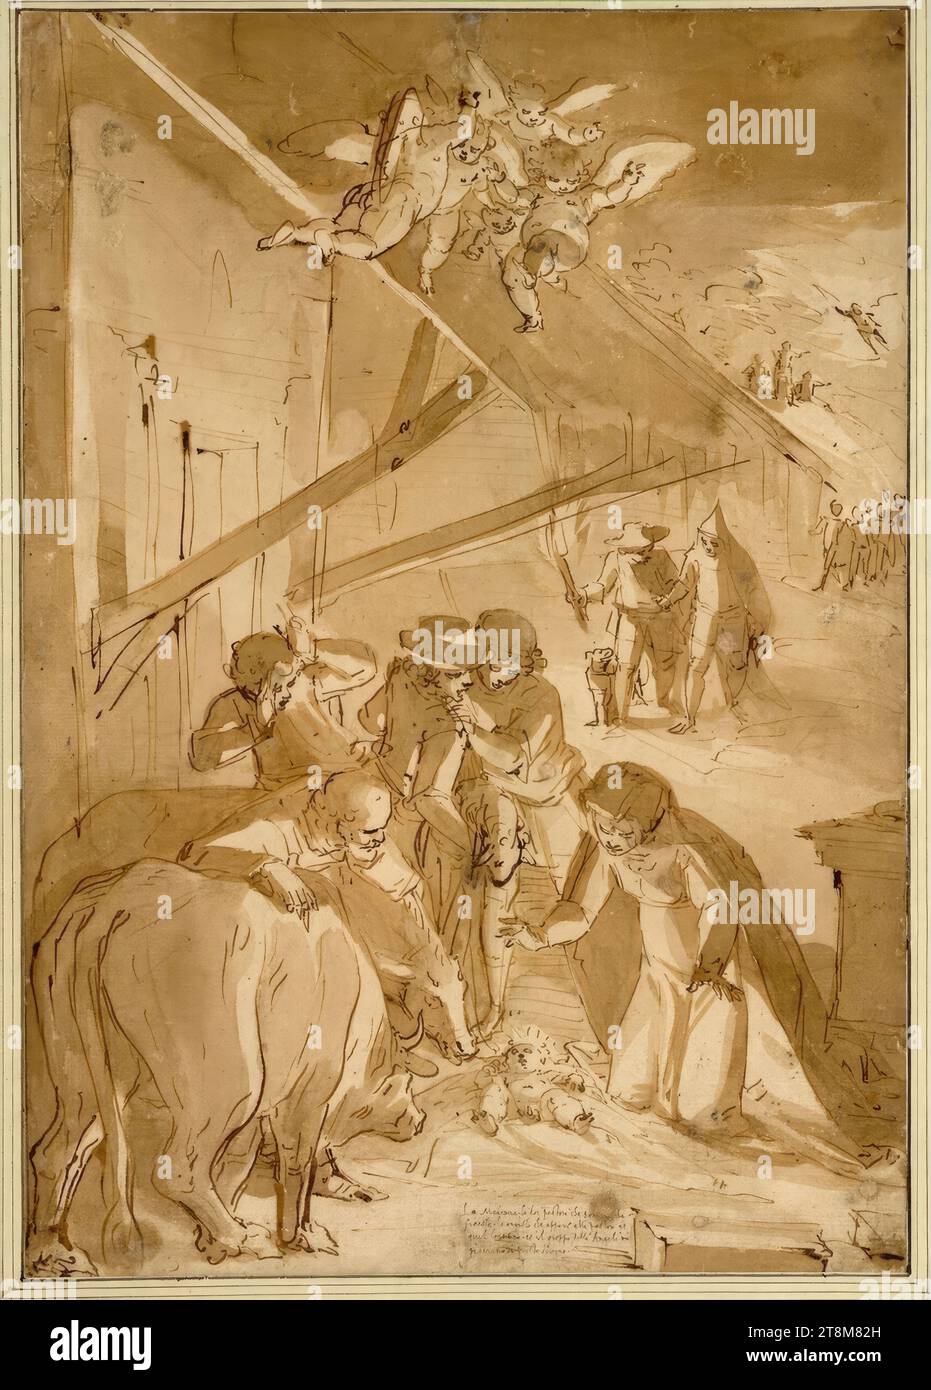 Geburt Christi, Luca Cambiaso (Moneglia 1527 - 1585 San Lorenzo de El Escorial), Zeichnung, Feder, laviert, 35.6 x 25.0 cm, u.r. Herzog Albert von Sachsen-Teschen, in der Mitte unten in alter Federschrift 'The Madonna, the two shepherds carrying the, torch, the angel appearing to the shepherds and, that distant one and the group of Angels, please me in this drawing Stock Photo